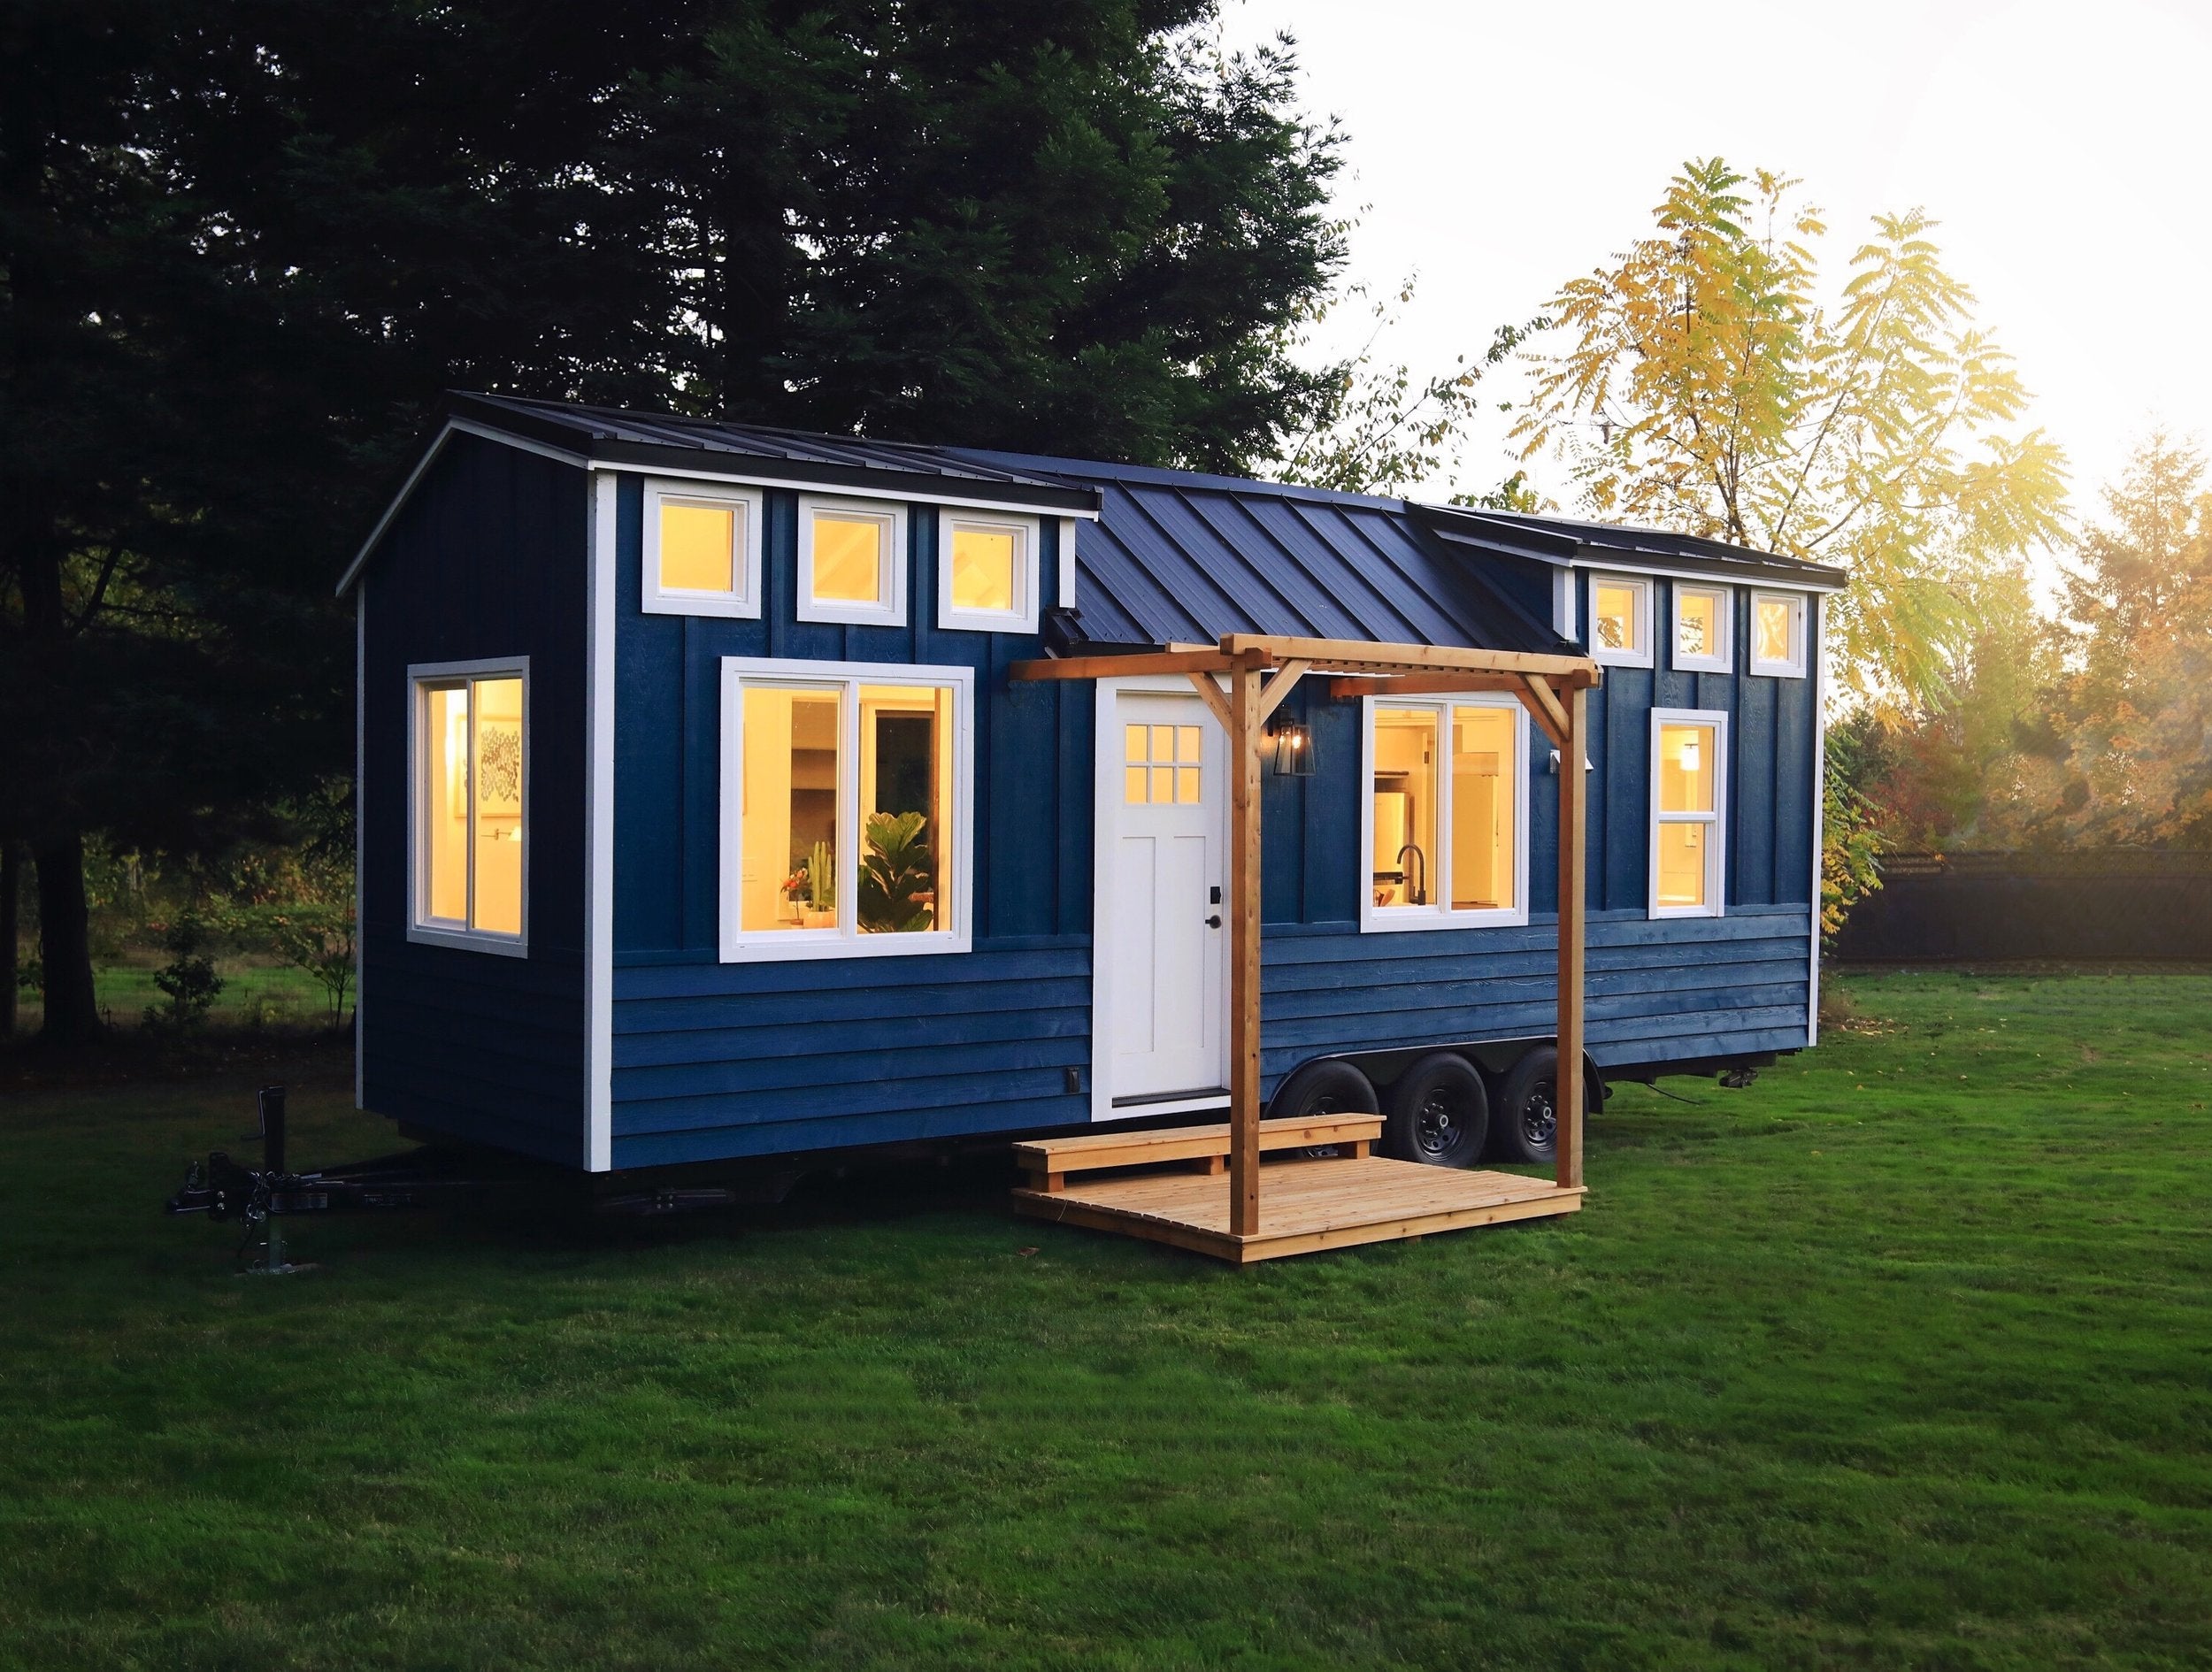 9 Cool Tiny House Gadgets and Designs